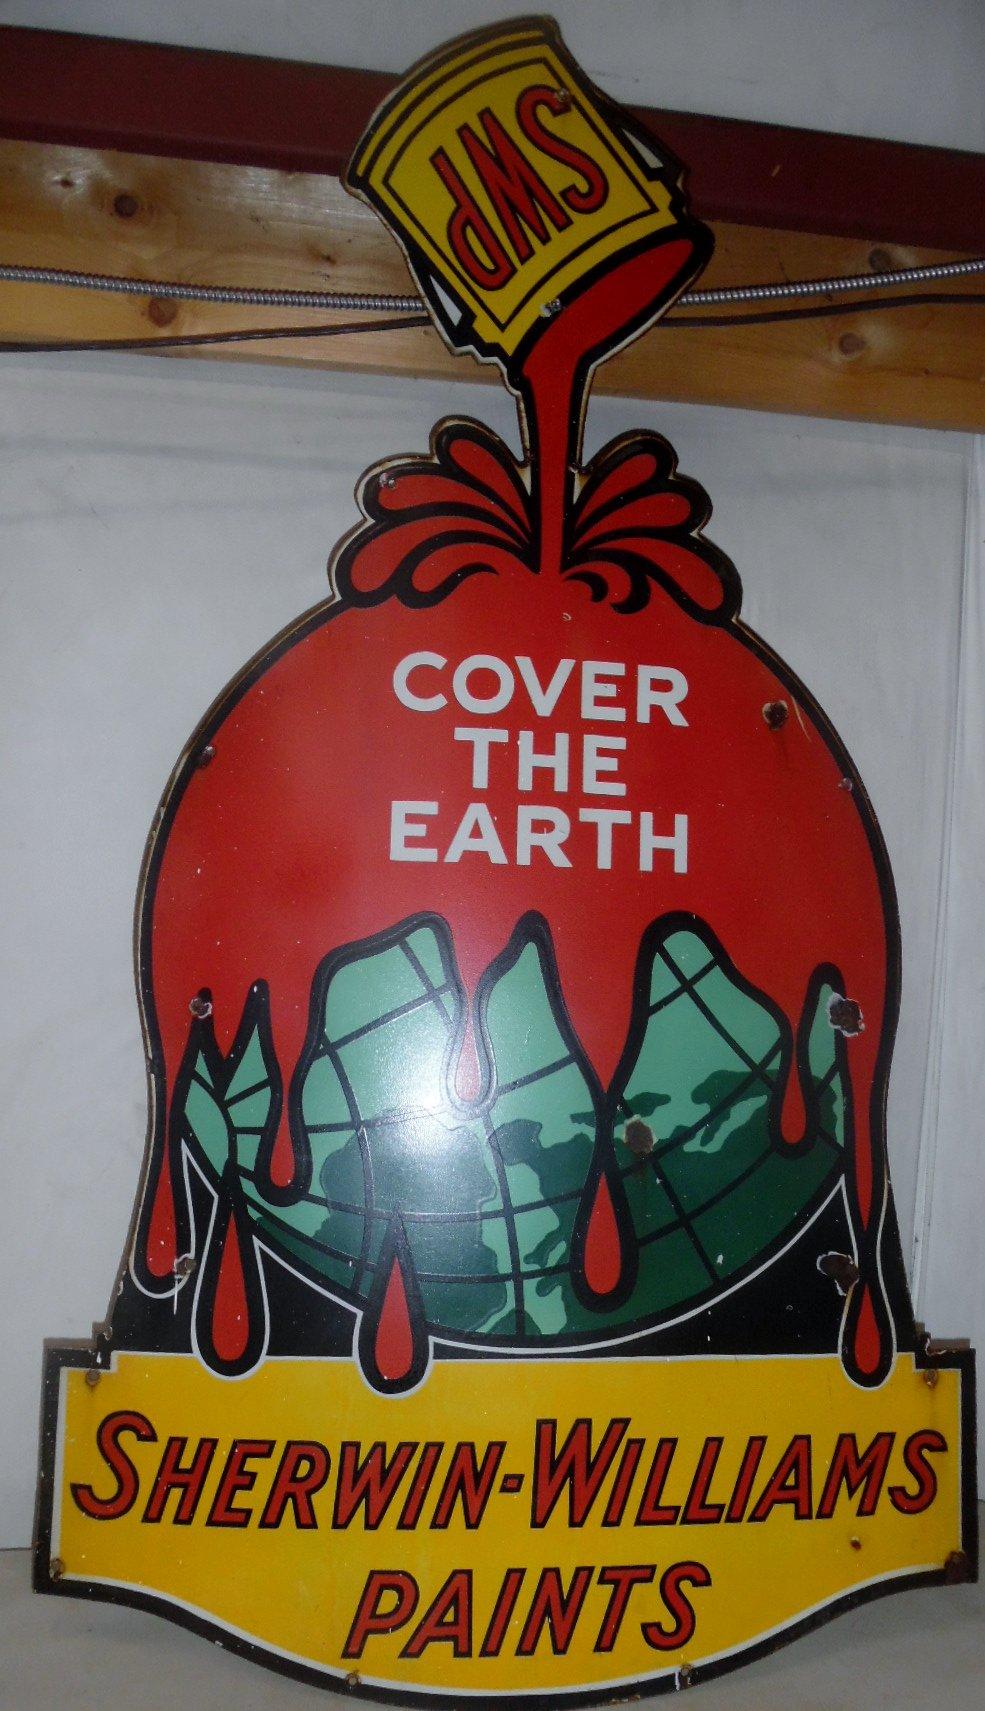 Porcelain Die Cut Cover the Earth Sherwin-Williams Paints